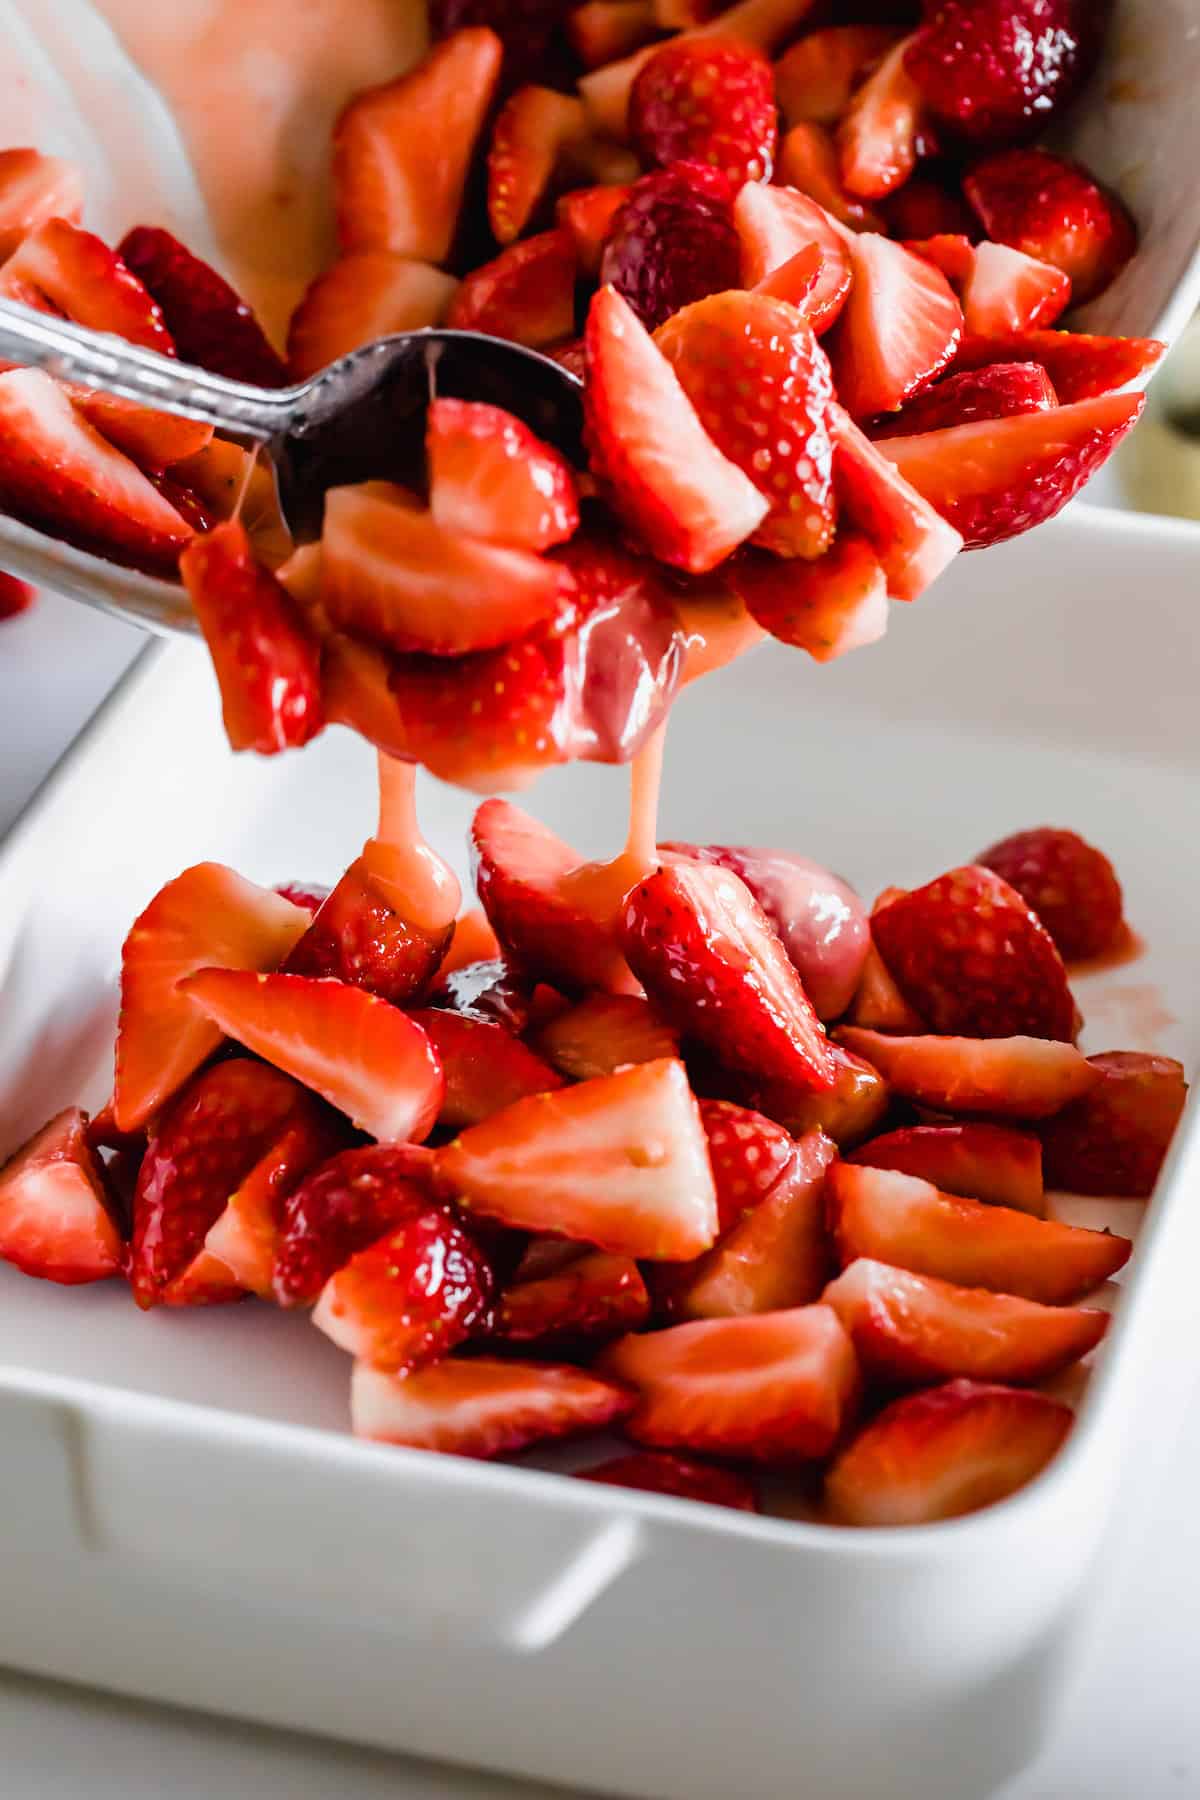 Strawberry Filling Being Poured From a Bowl Into a Baking Pan